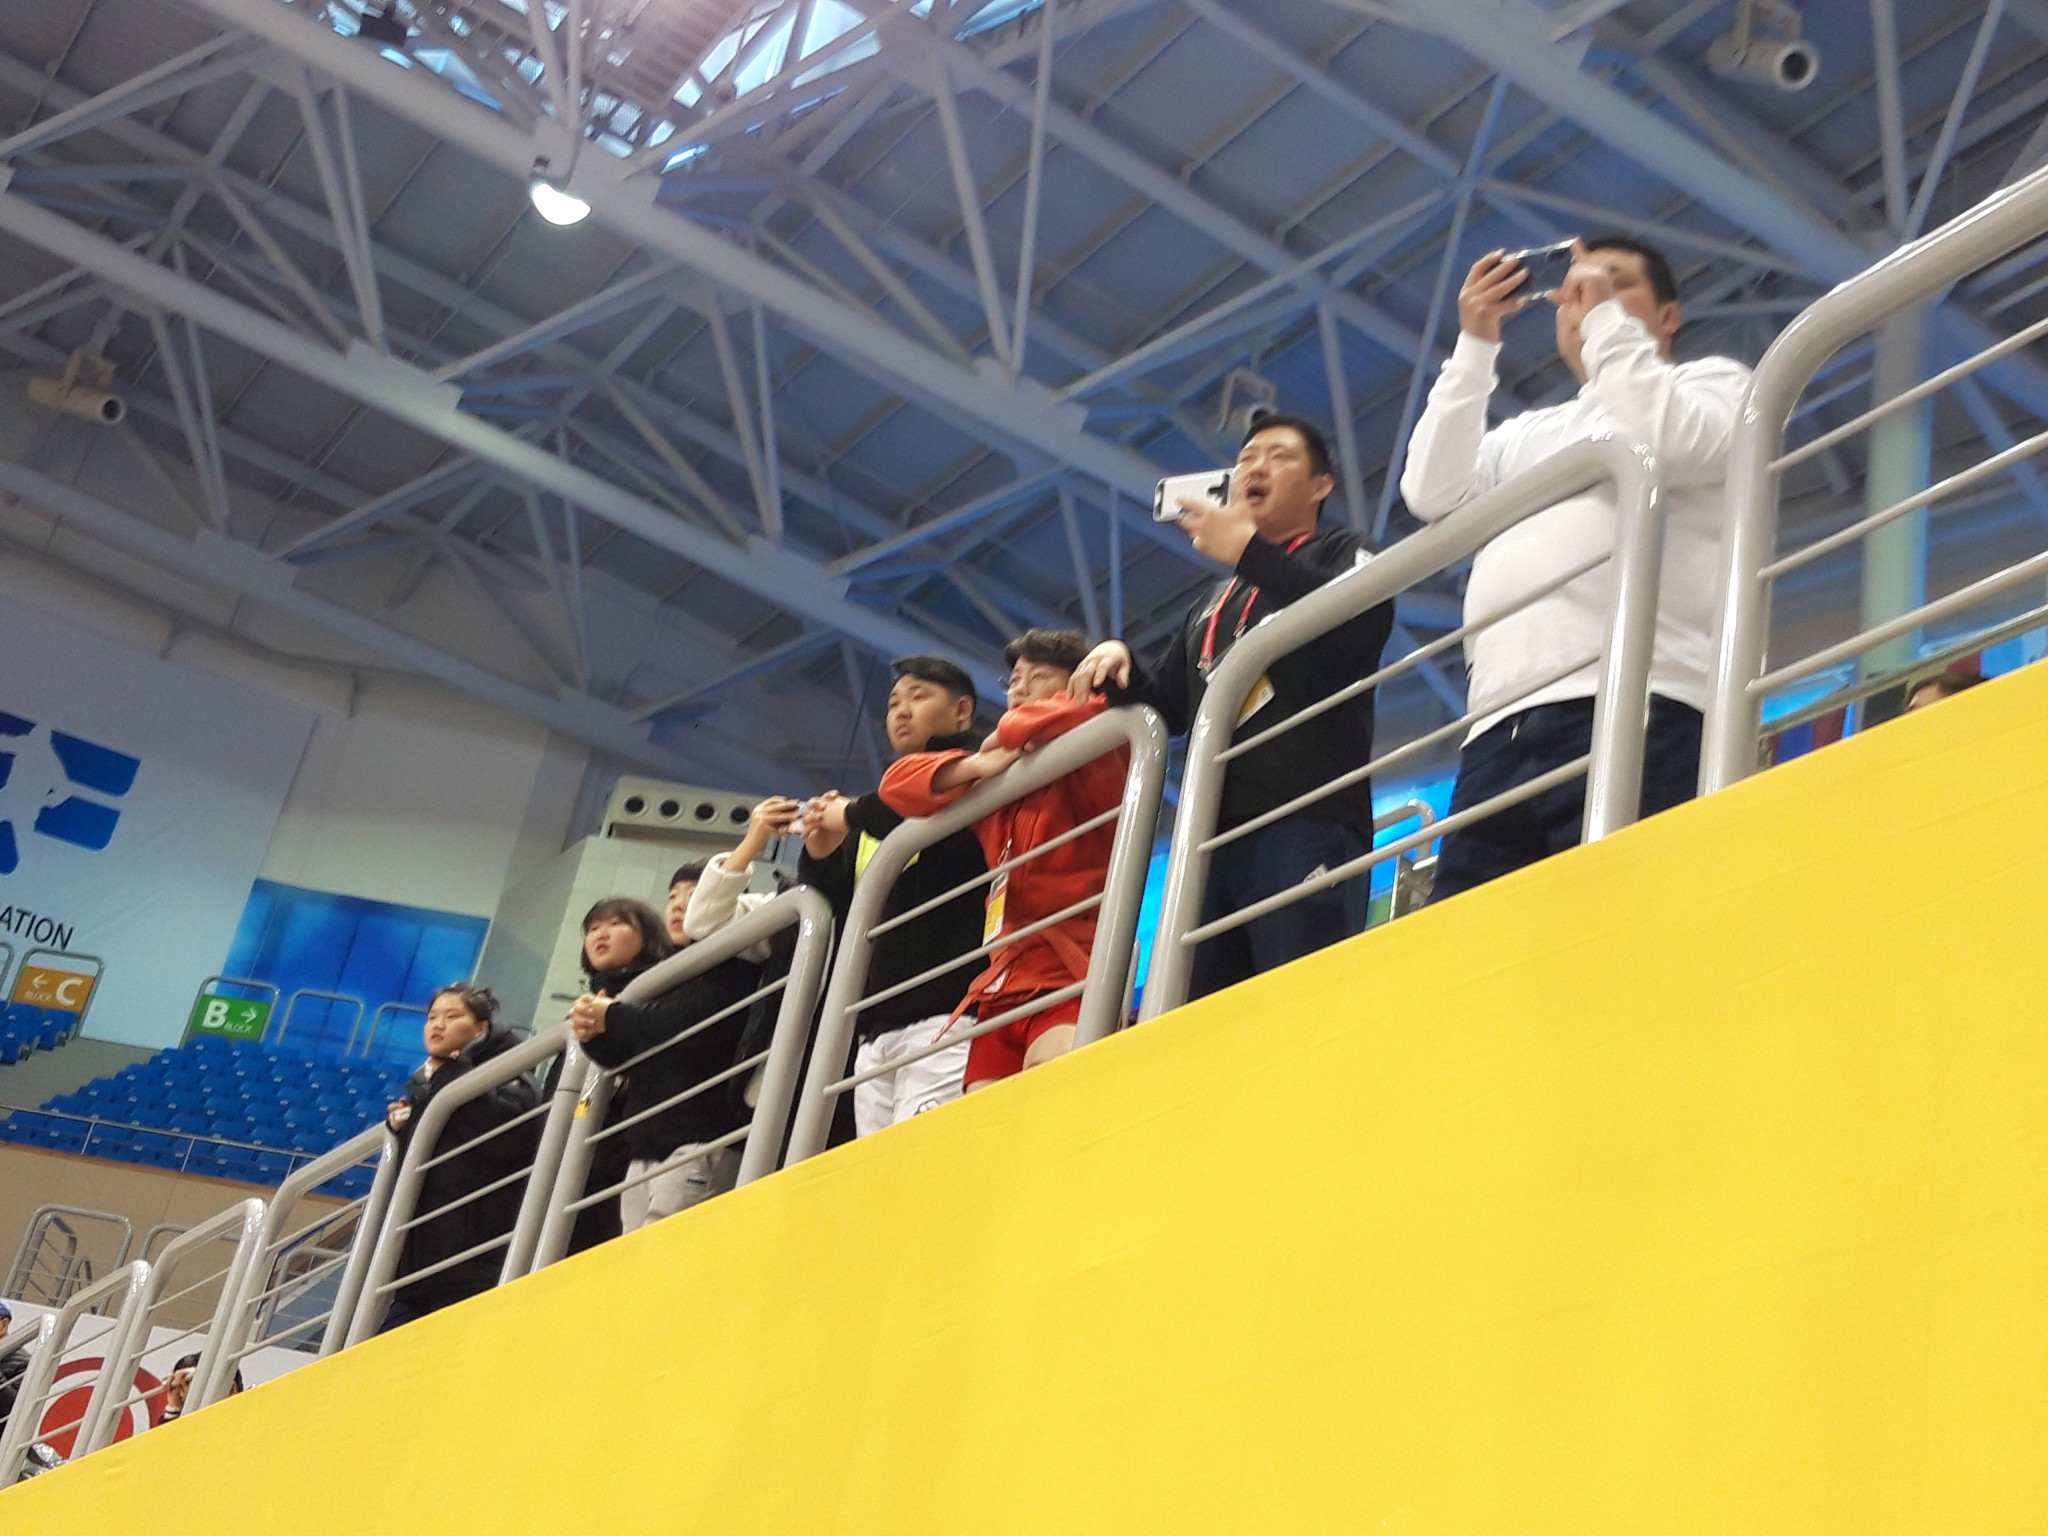 The crowd cheer Jang Jaehee of South Korea to victory in his 74kg preliminary contest against Arnur Kuatay from Kazakhstan ©ITG 